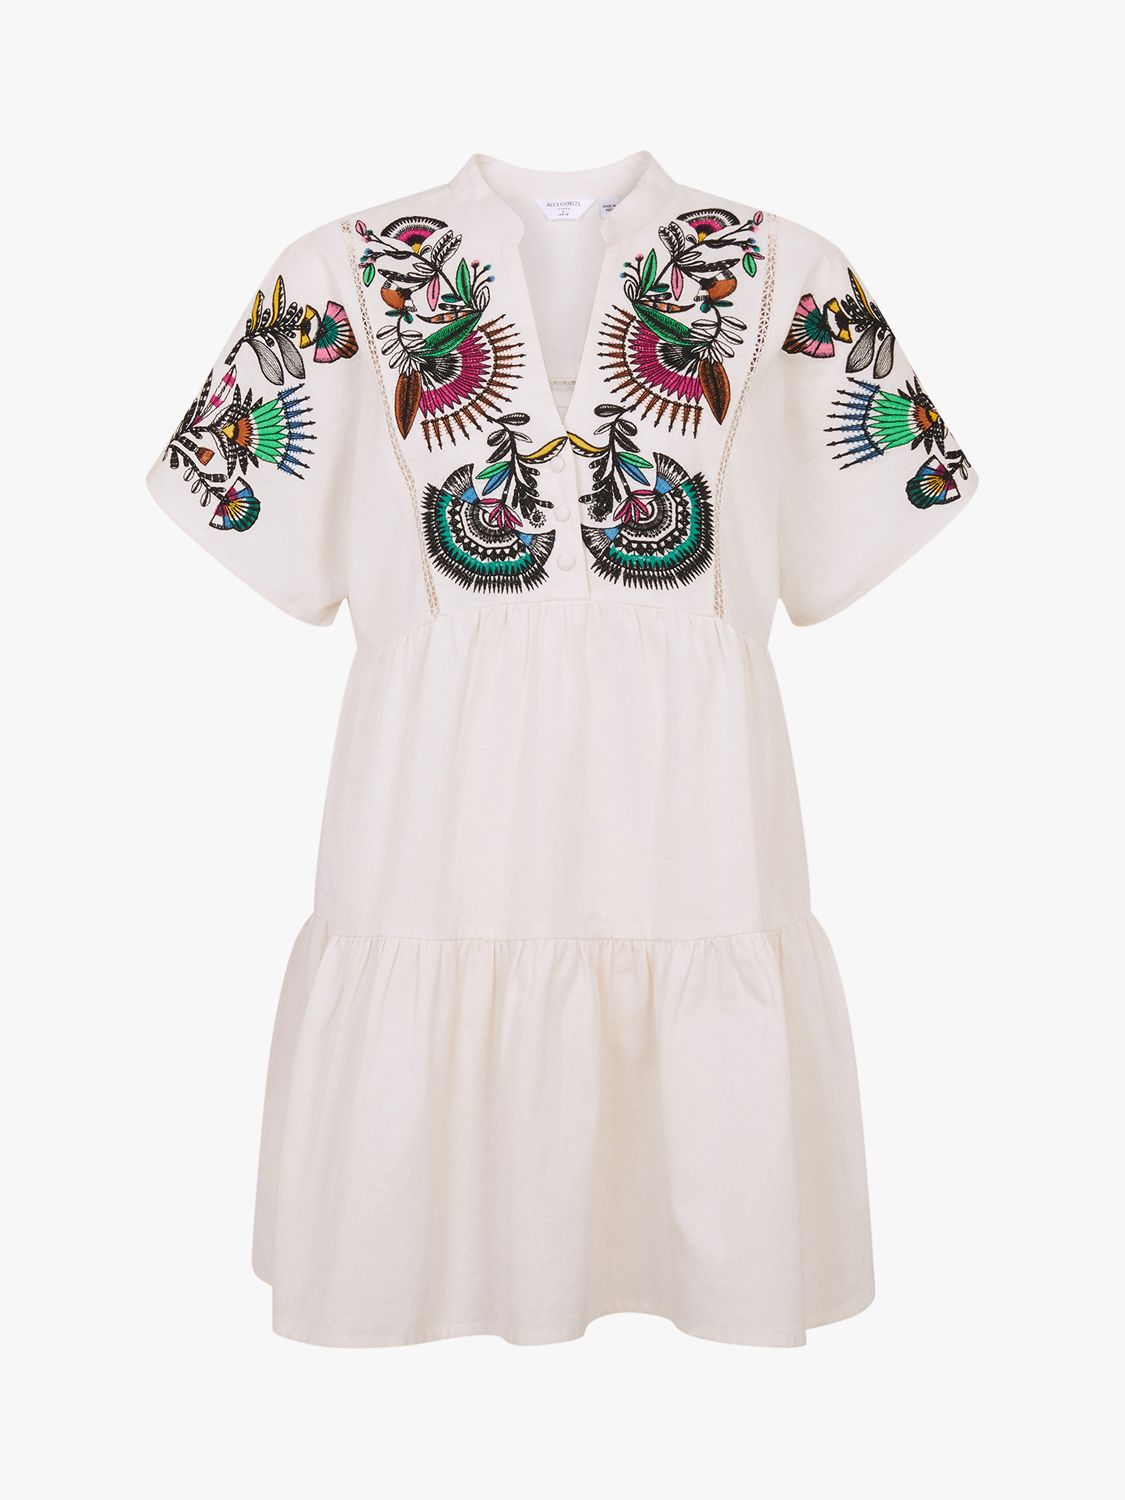 Buy Accessorize Fan Embroidered Cover Up Dress, White/Multi Online at johnlewis.com